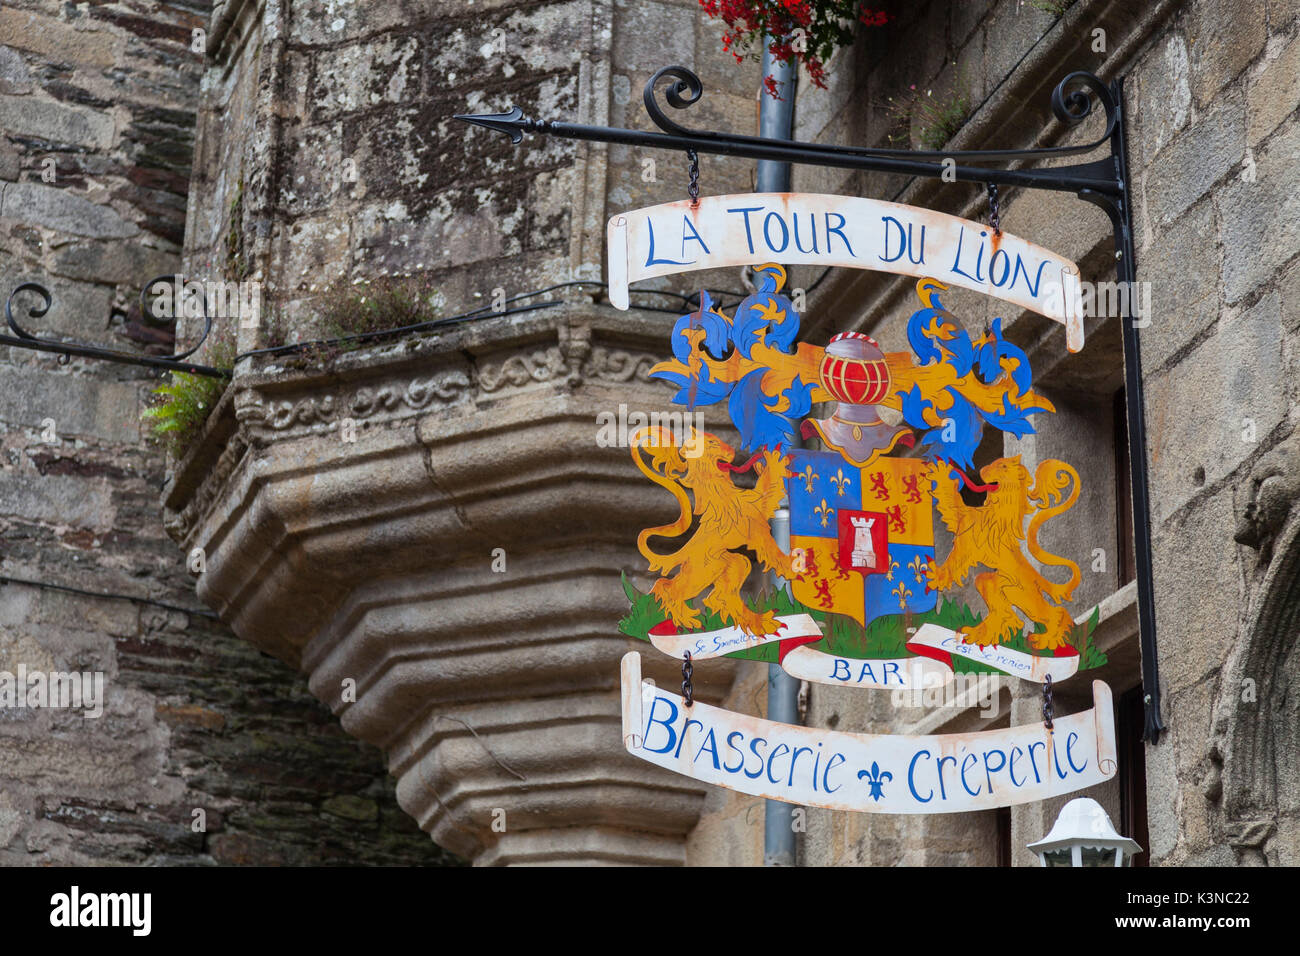 Rochefort-en-terre, Brittany, France. A signboard of brewery and creperie. Stock Photo